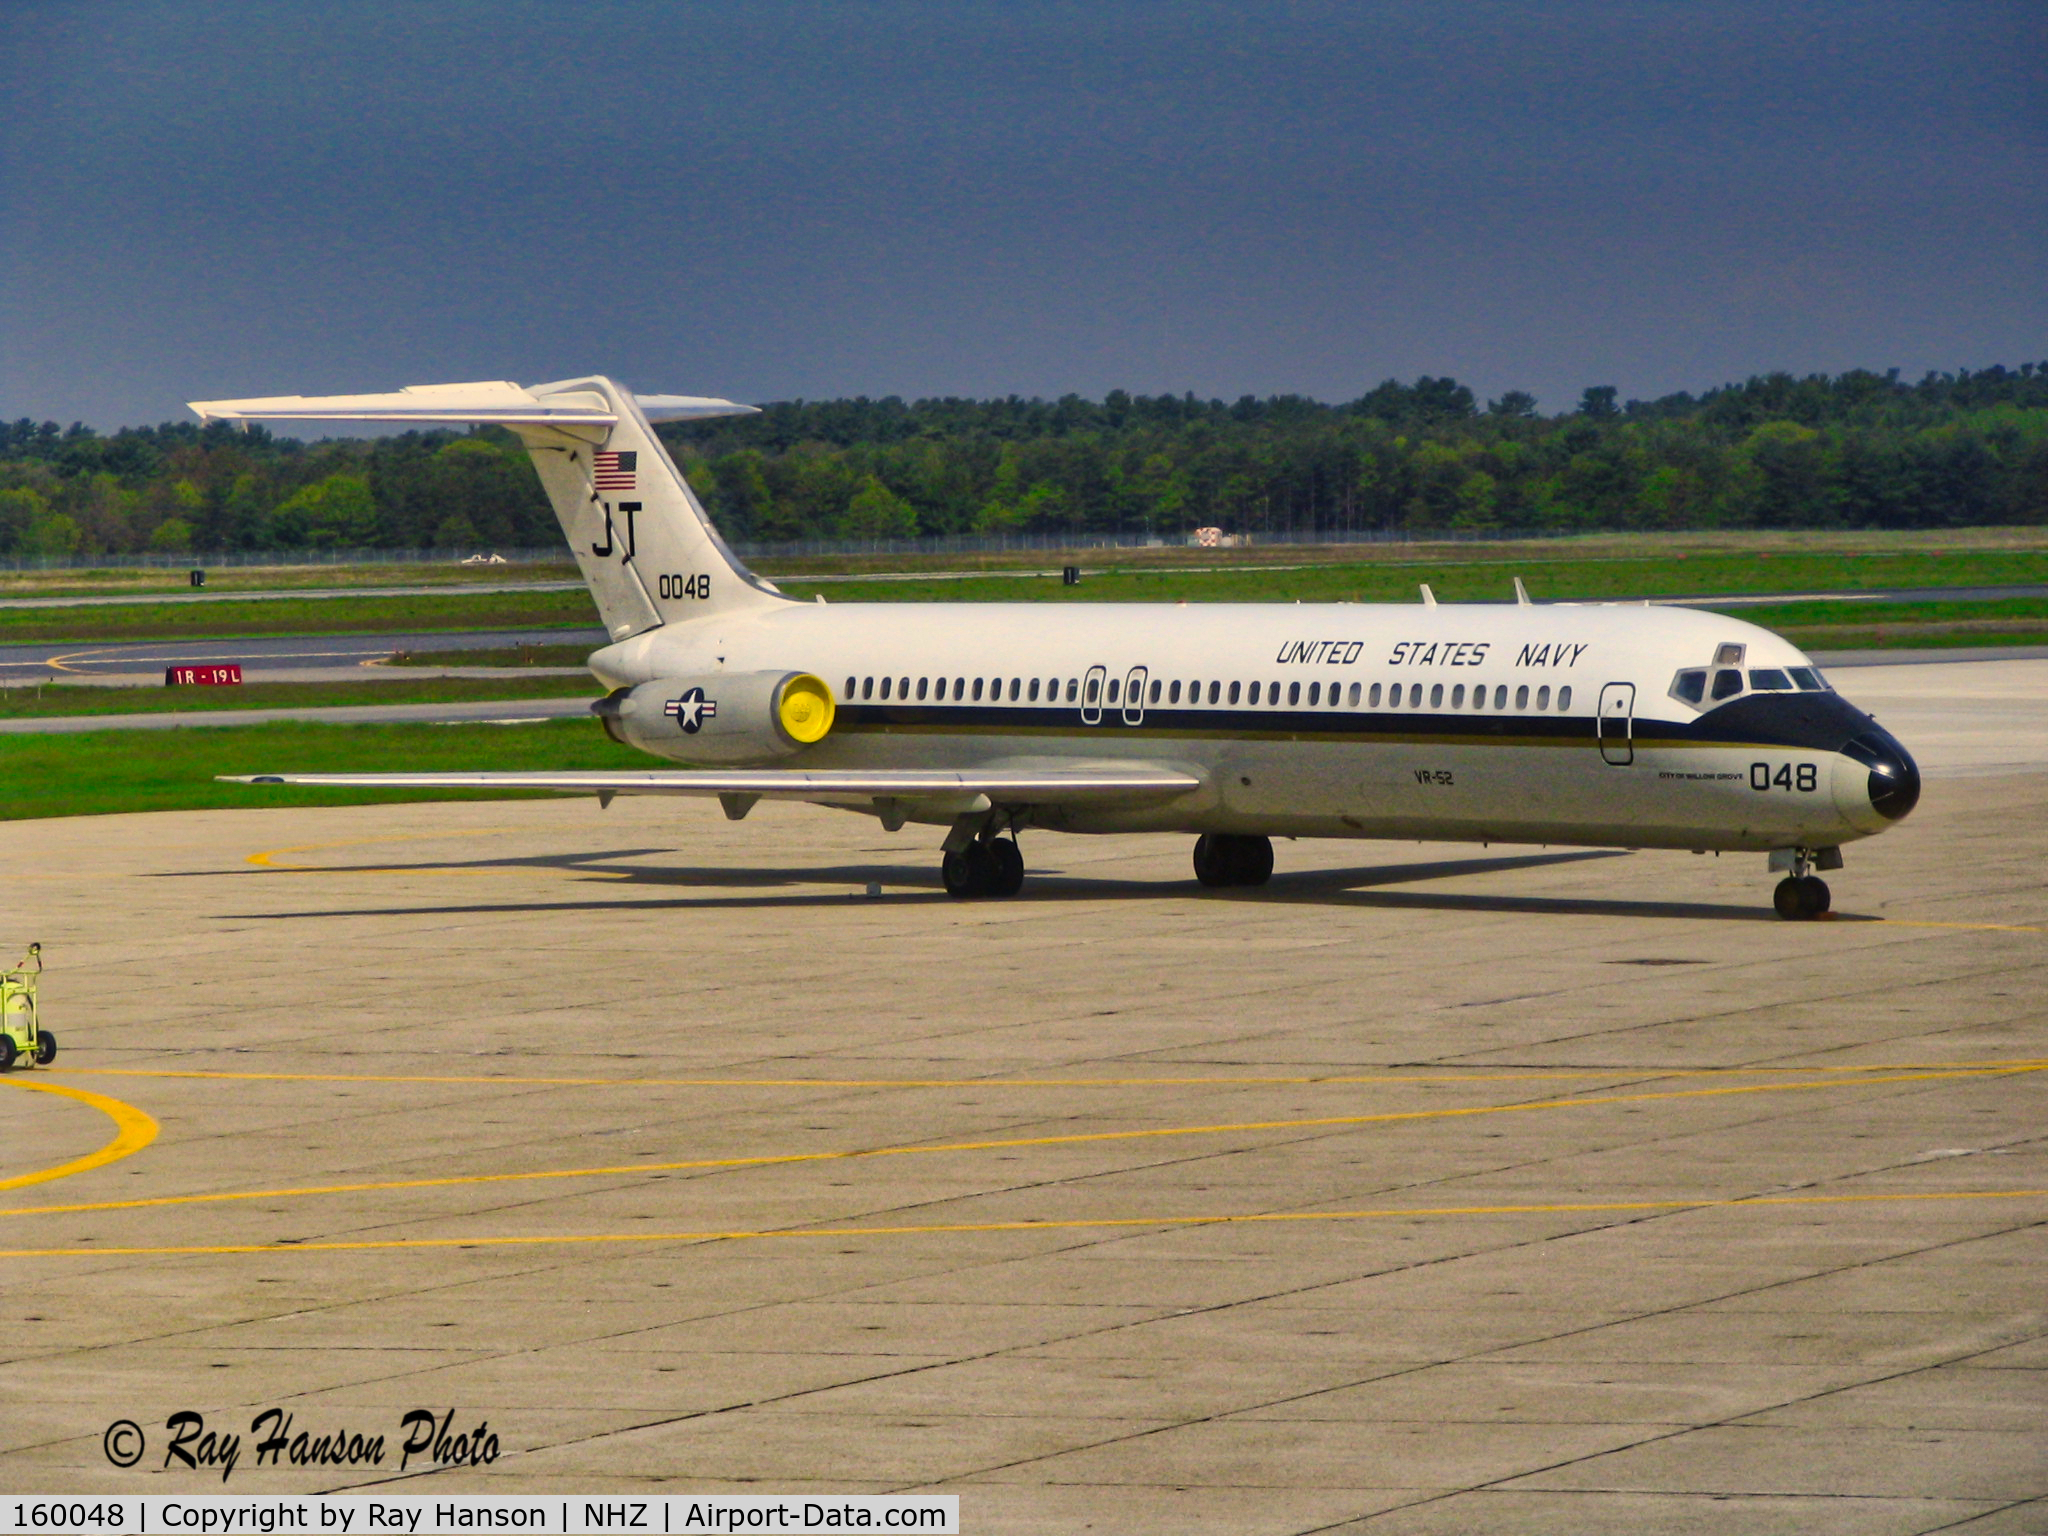 160048, 1975 McDonnell Douglas C-9B (DC-9-33) Skytrain II C/N 47681, C-9A with VR-52 at Brunswick NAS in 2005